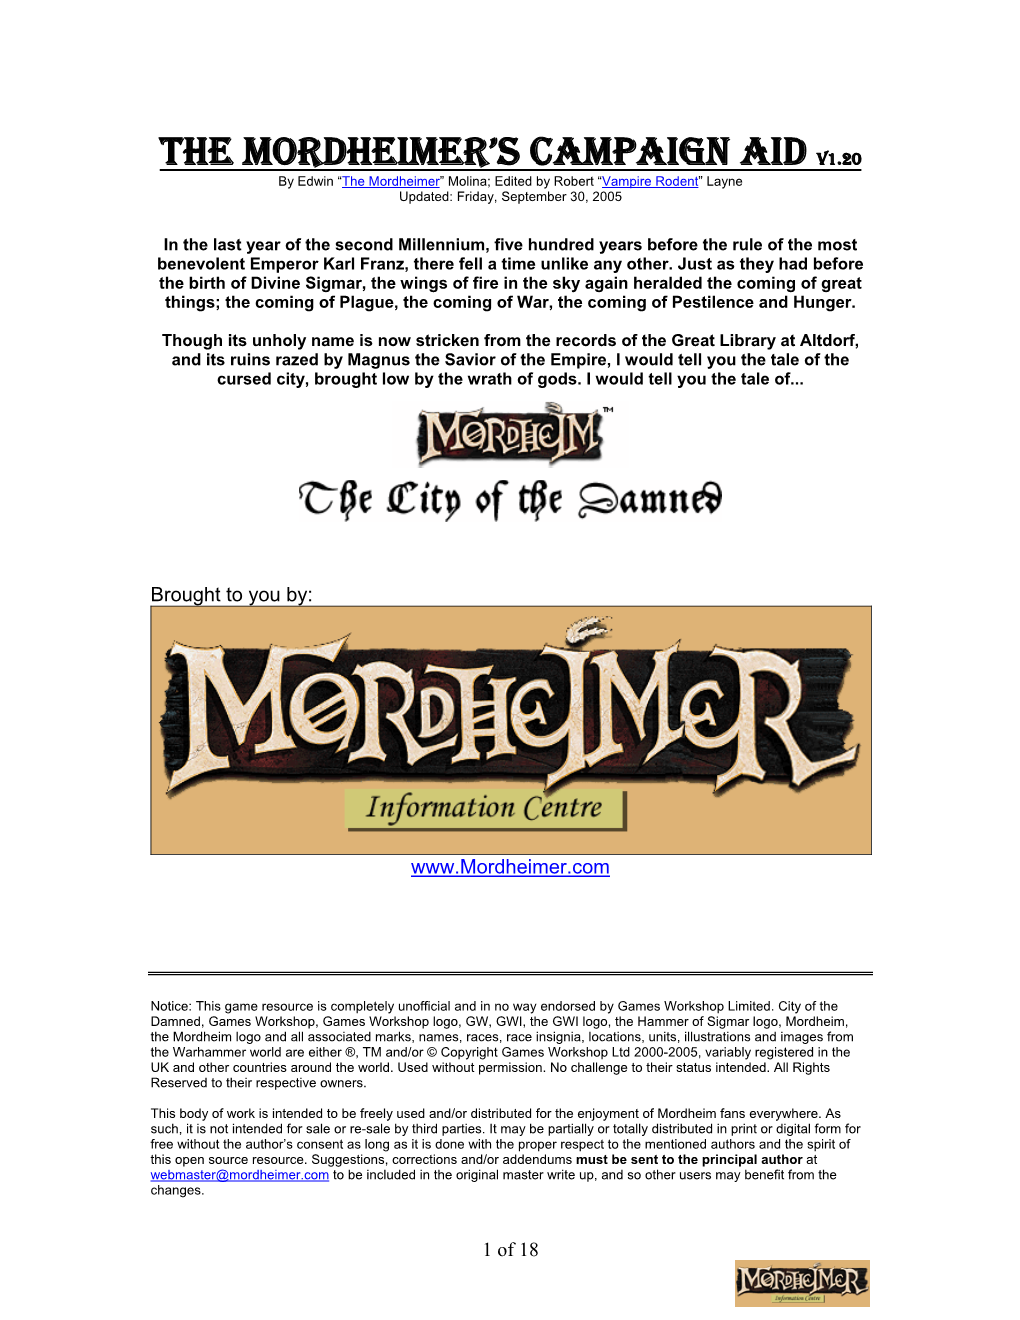 Mordheim Campaign Rules V1.1.” He Not Only Created and Shared His Work with Kind and Enthusiasm, but Allowed Me to Further Develop His Concepts